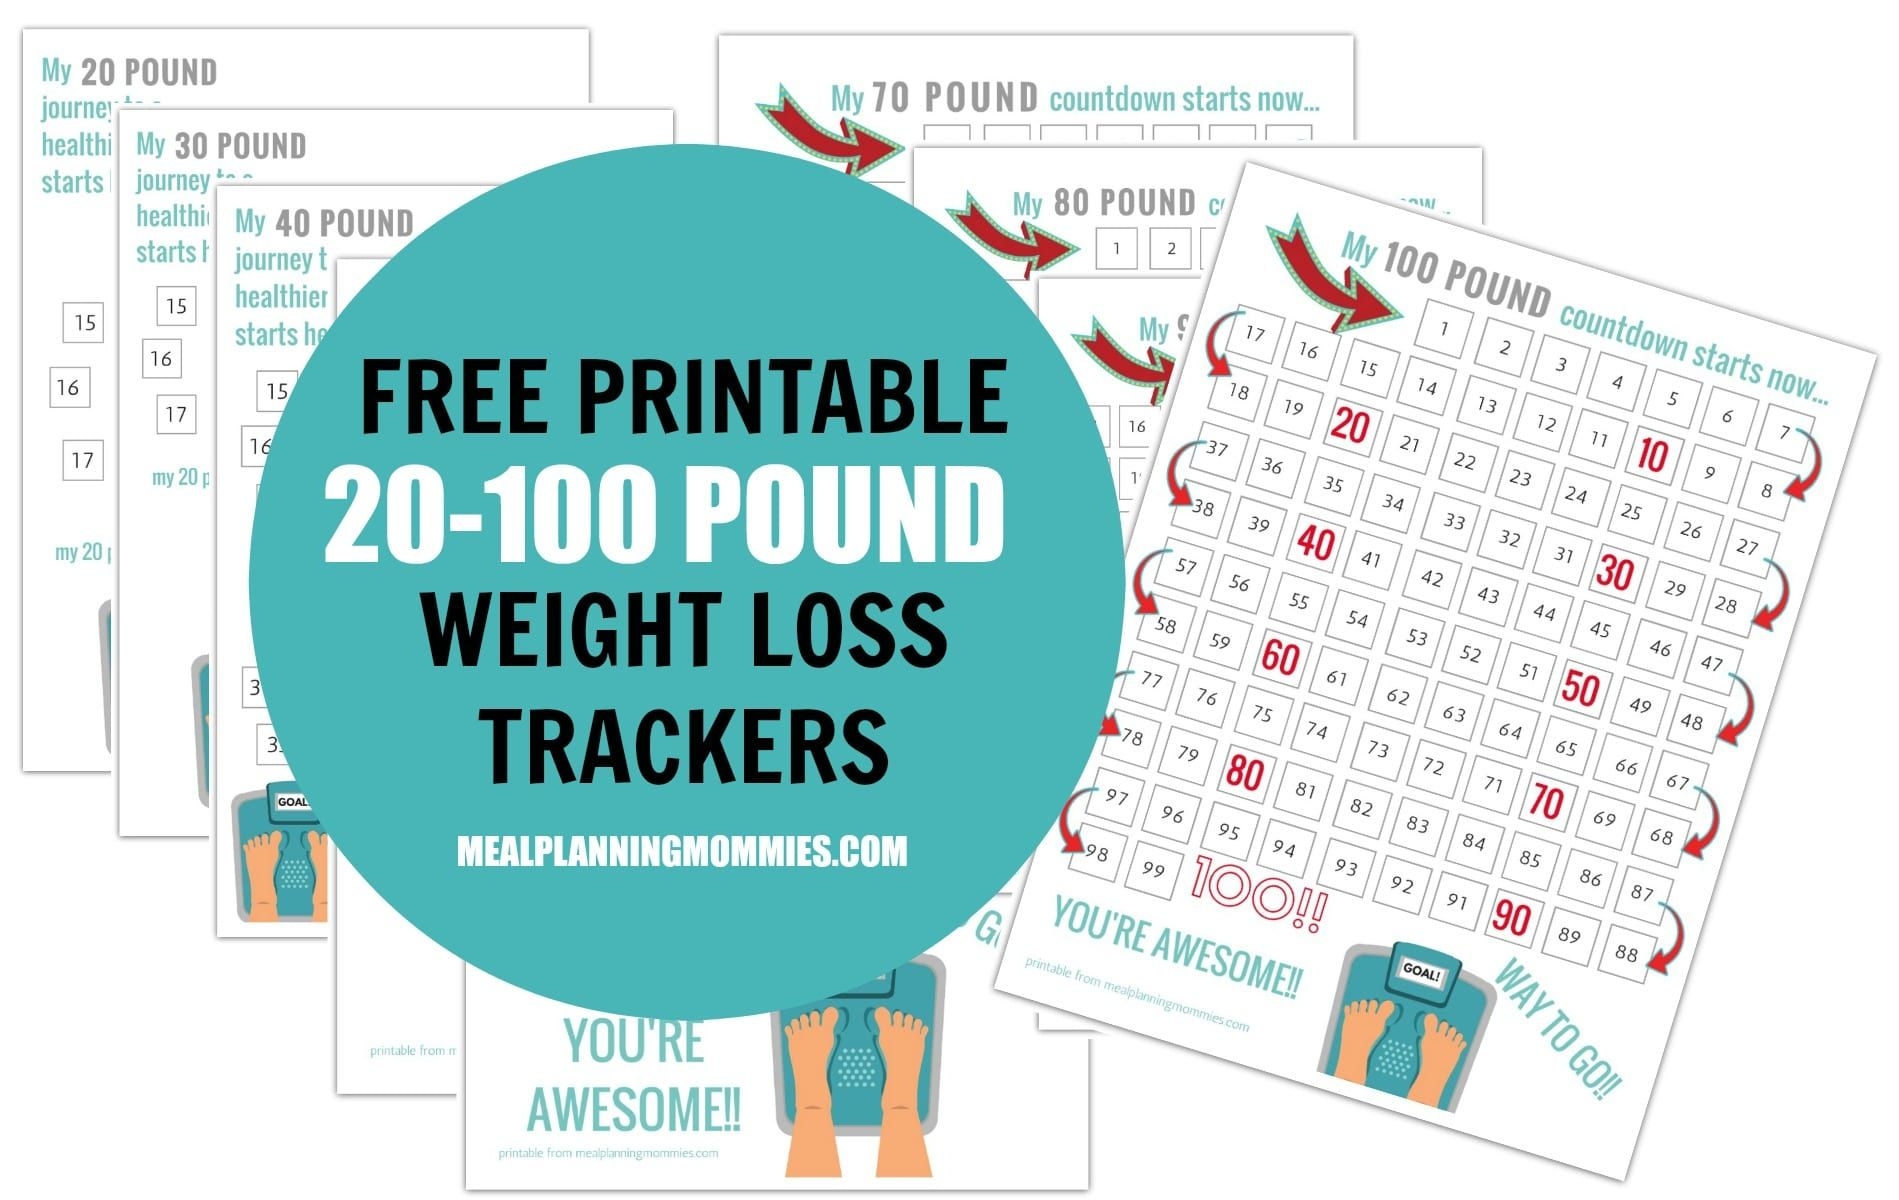 Free Printable 20-100 Pound Weight Loss Trackers - Meal